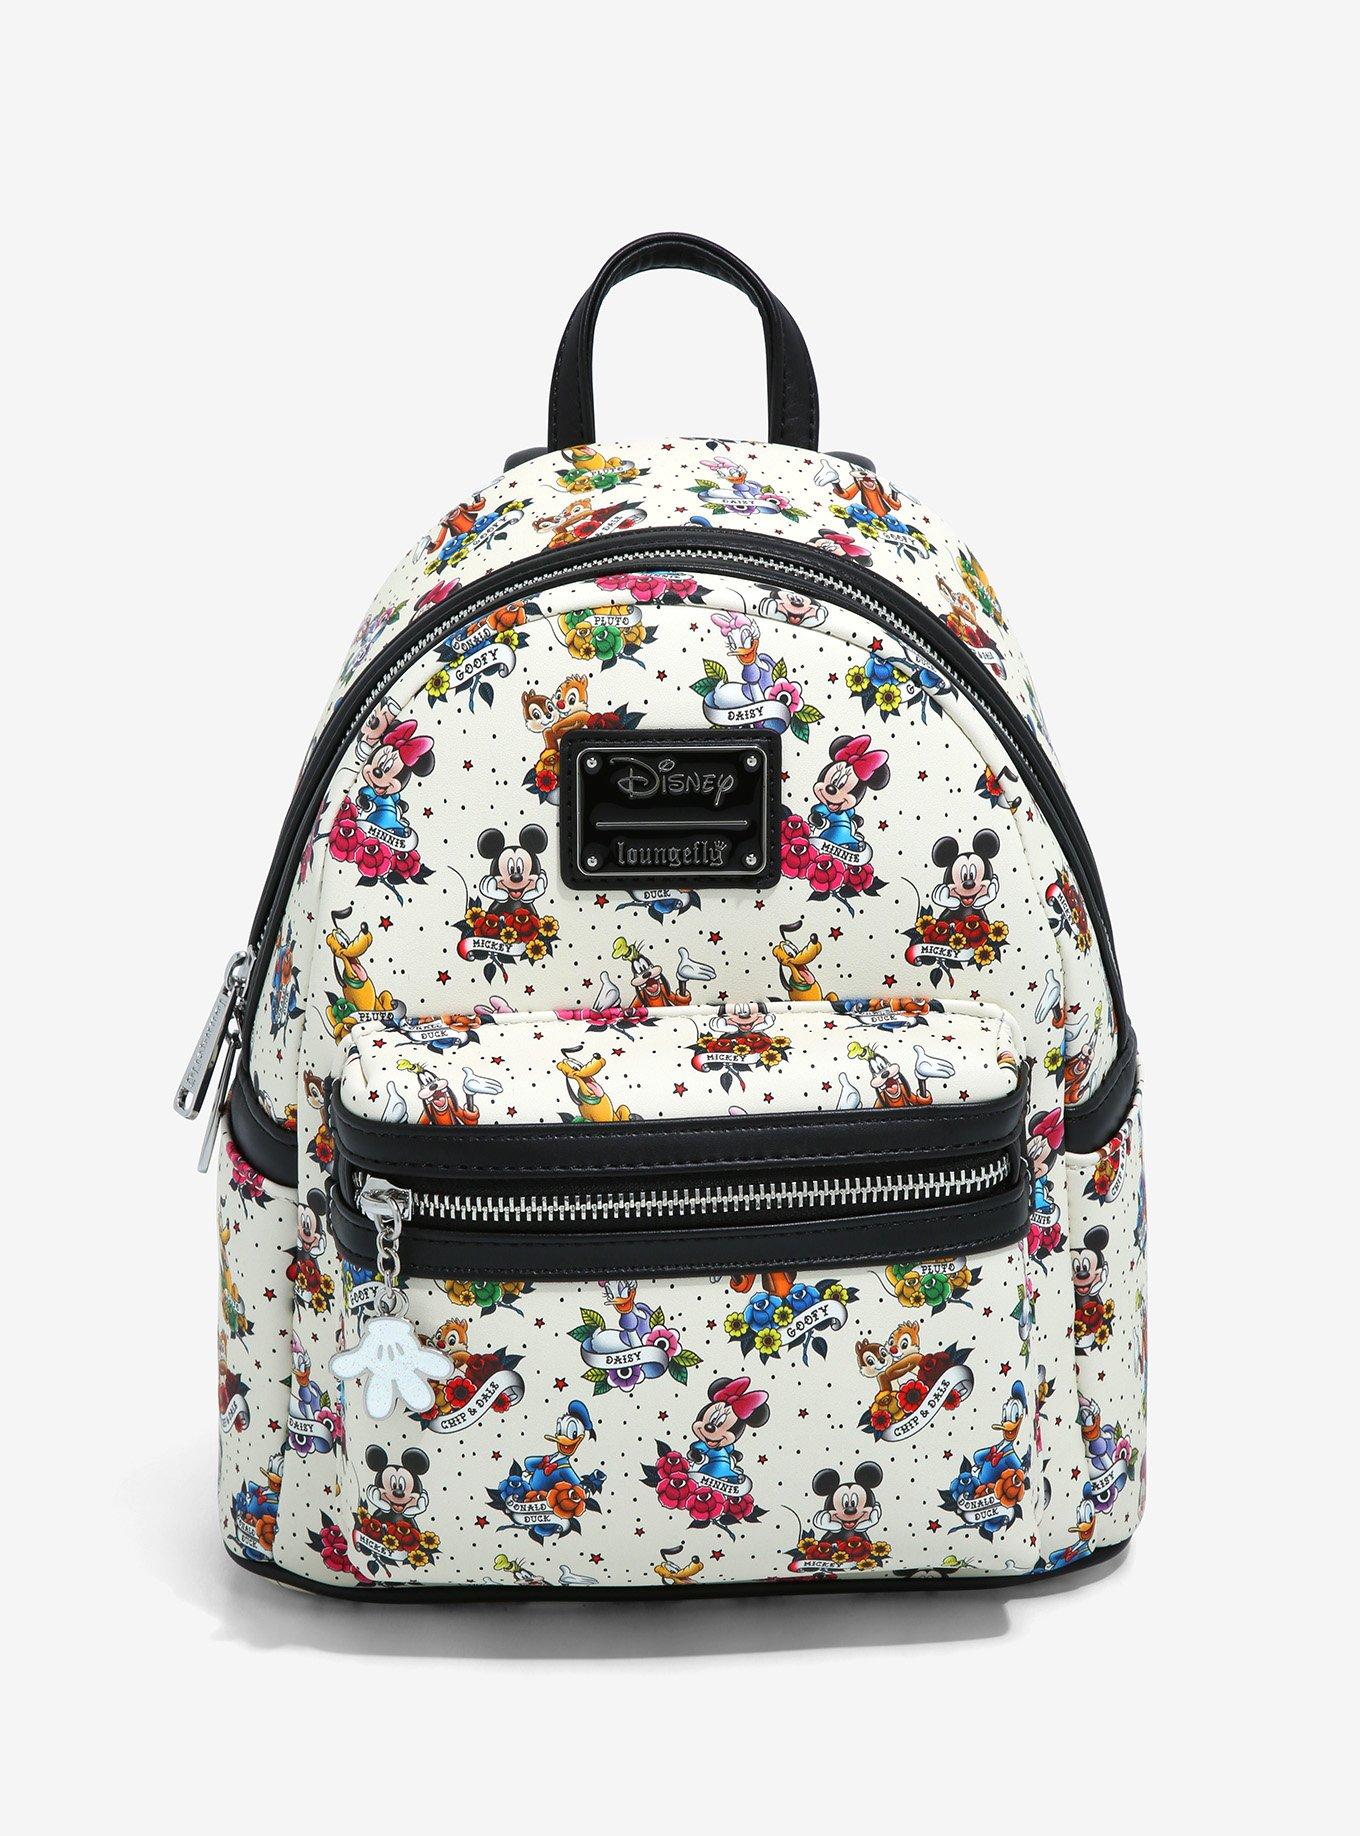 Disney Sweethearts Womens Convertible Backpack That Can Be Worn Several  Ways & Features Mickey Mouse & Minnie Mouse Artwork